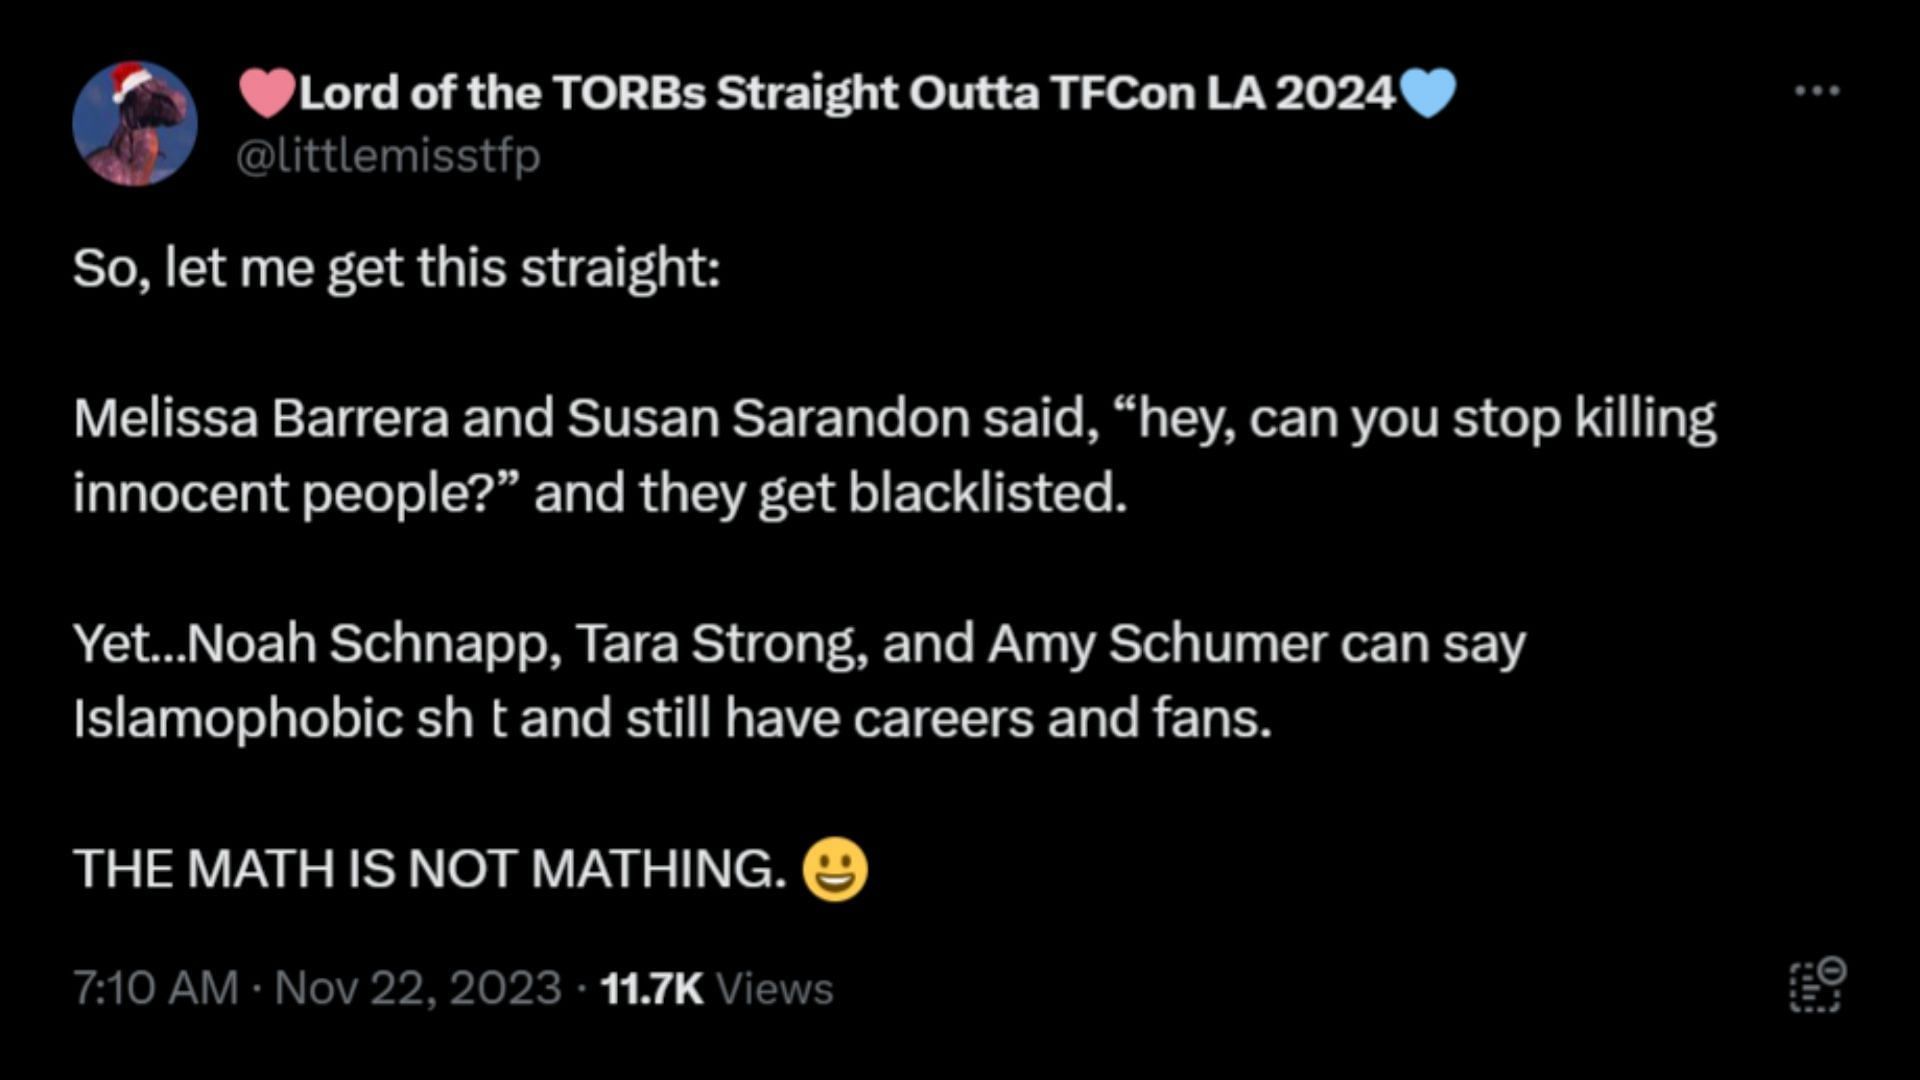 Netizens call out Hollywood for not firing Noah Schnapp or Amy Schumer but dropping Barrera for pro-Palestine posts. (Image via X/littlemisstfp)